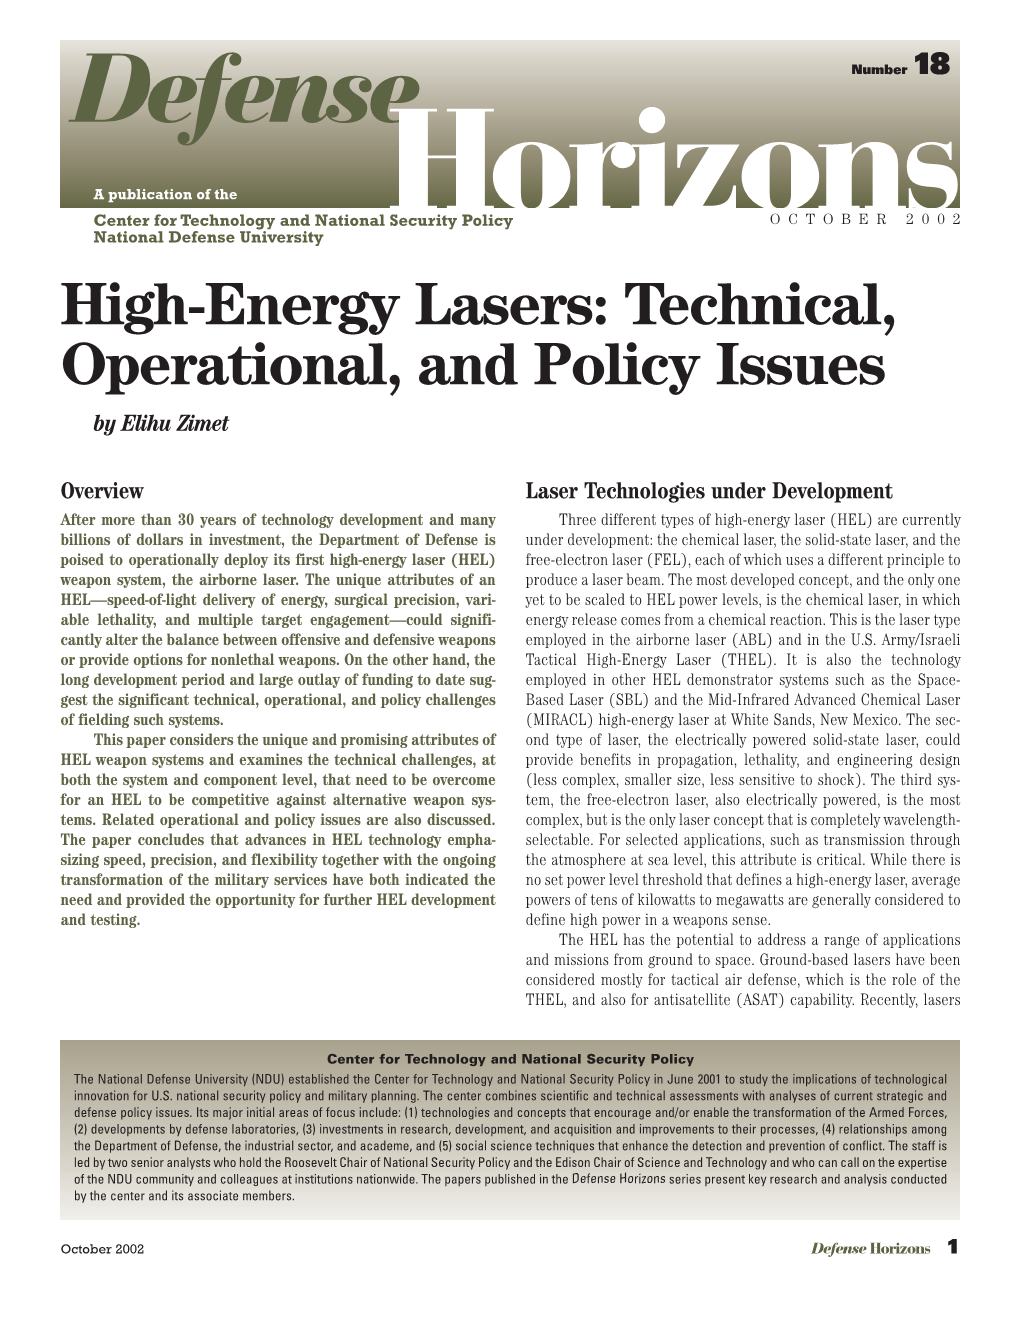 High-Energy Lasers: Technical, Operational, and Policy Issues by Elihu Zimet